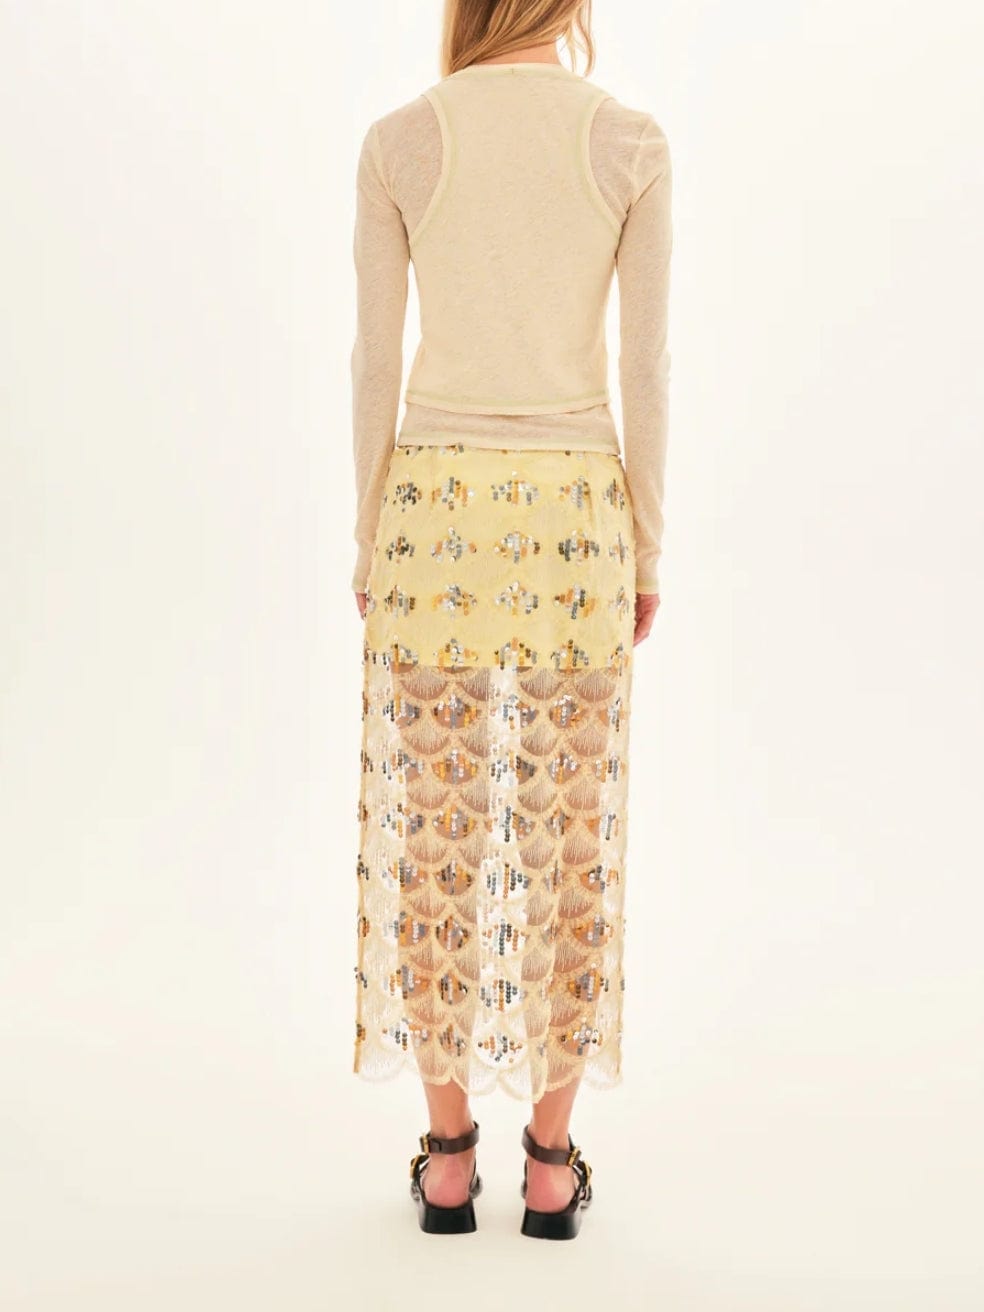 Helen Sequined Pencil Midi Skirt in Yellow